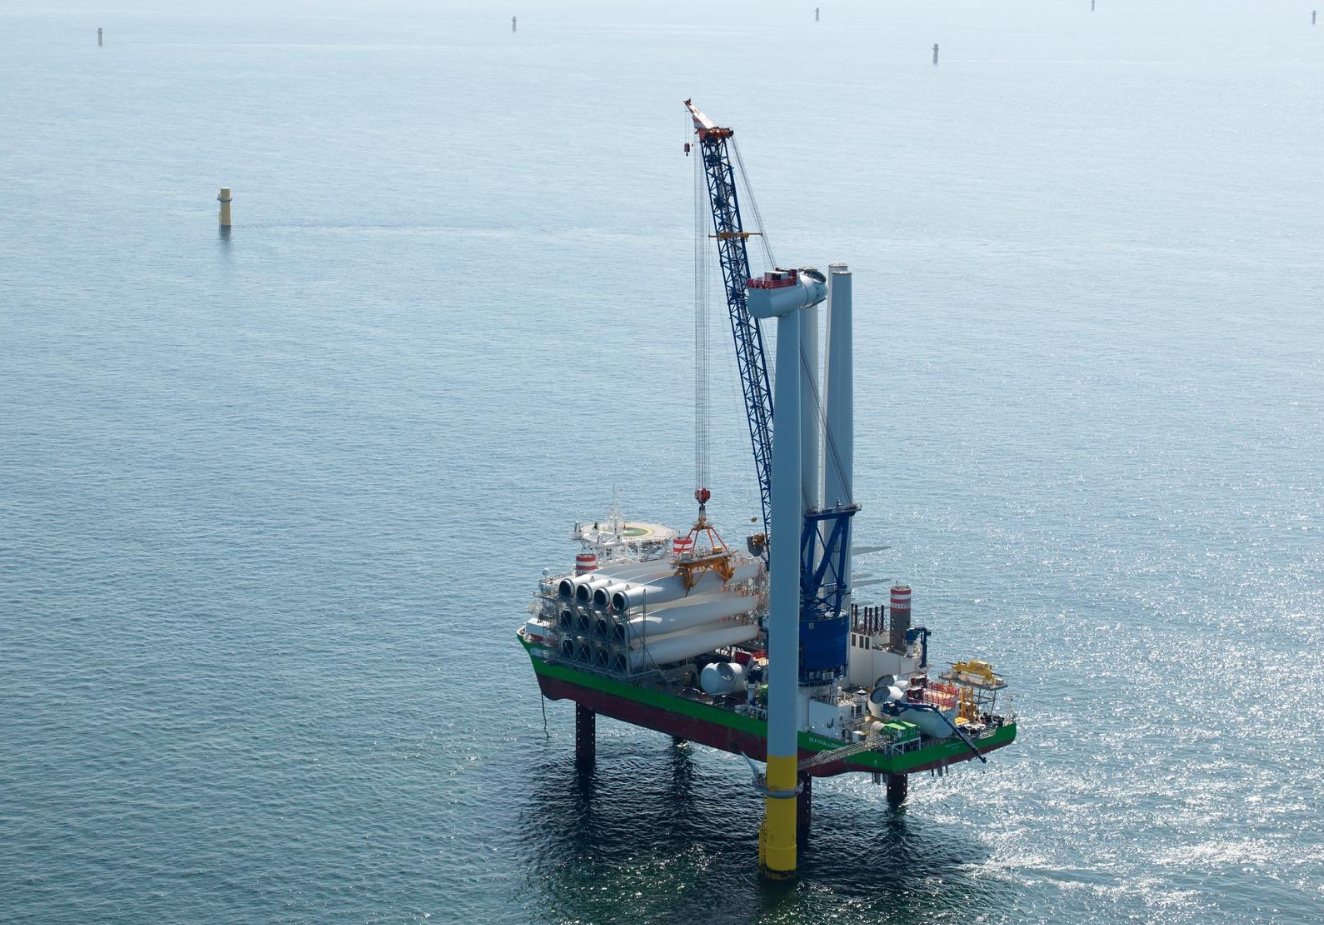 Ørsted reaches 7 GW offshore wind capacity with turbine No. 1500